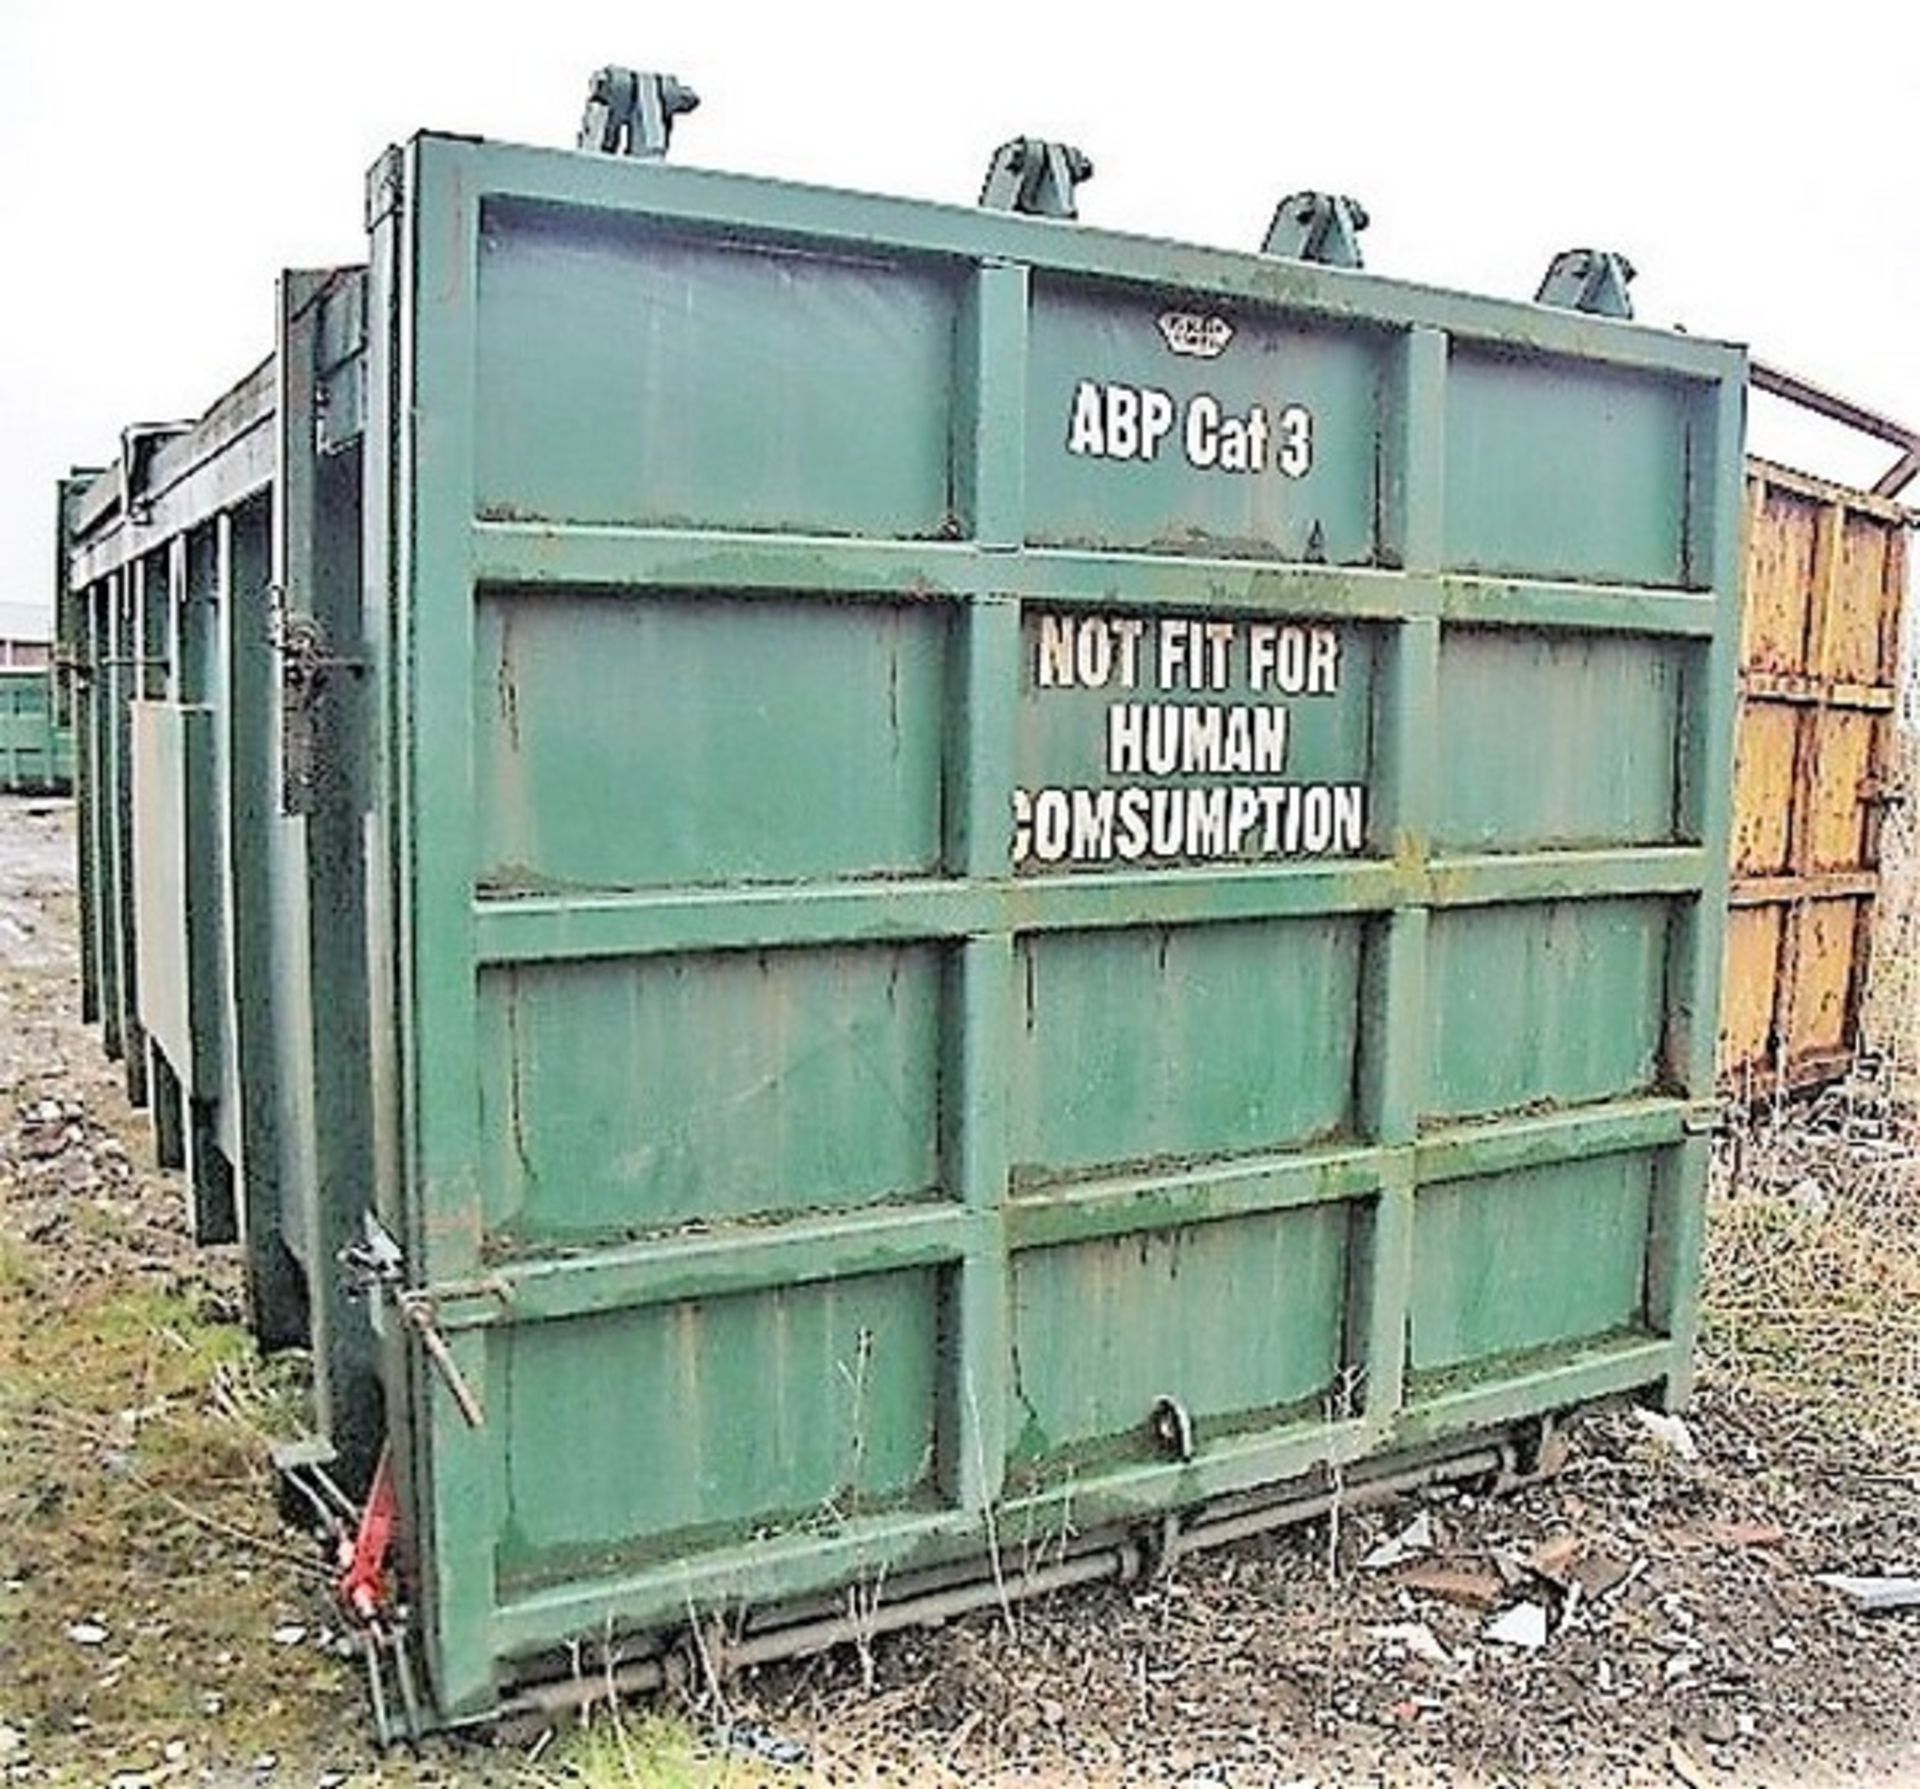 FOOD WASTE SKIP C/W ENCLOSED TOP. MANUFACTURED BY C F BOOTH. SOLD FROM ERROL AUCTION SITE. VIEWING A - Image 4 of 4